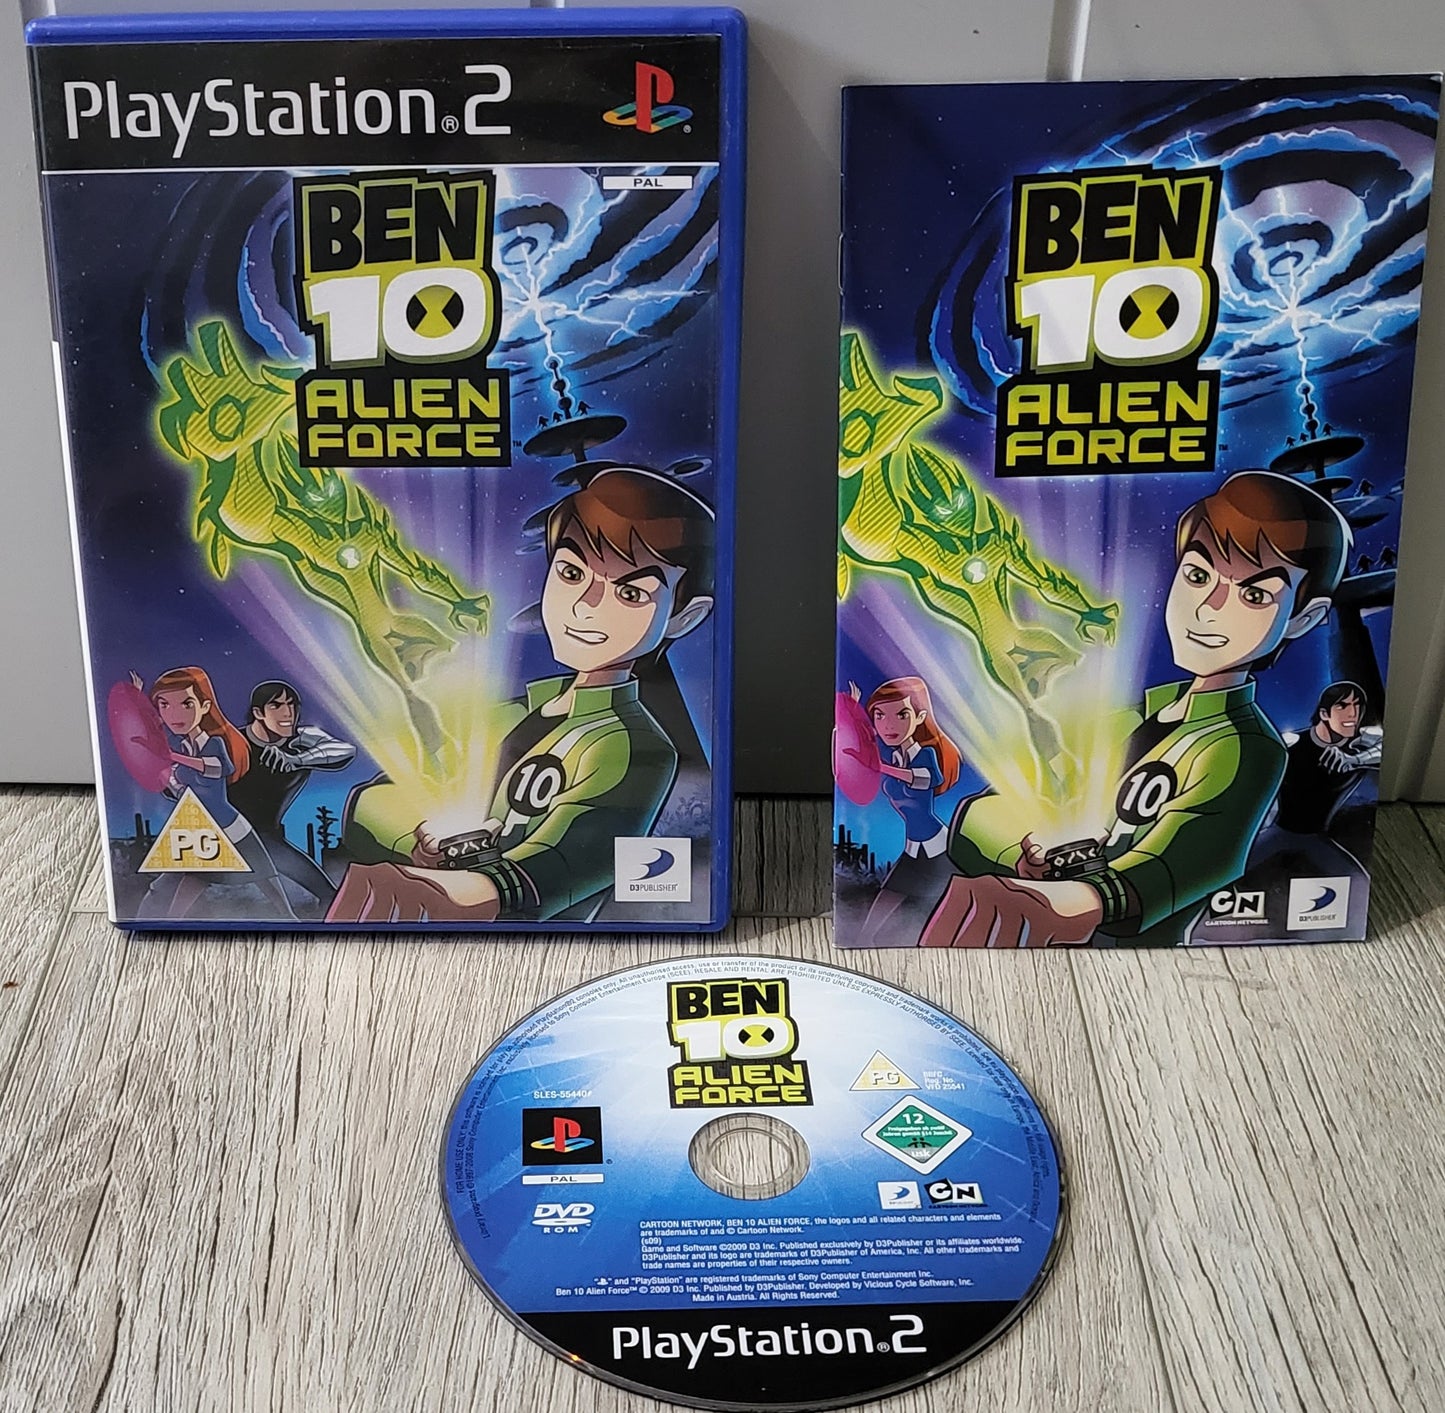 Ben 10 Alien Force Sony Playstation 2 (PS2) Game